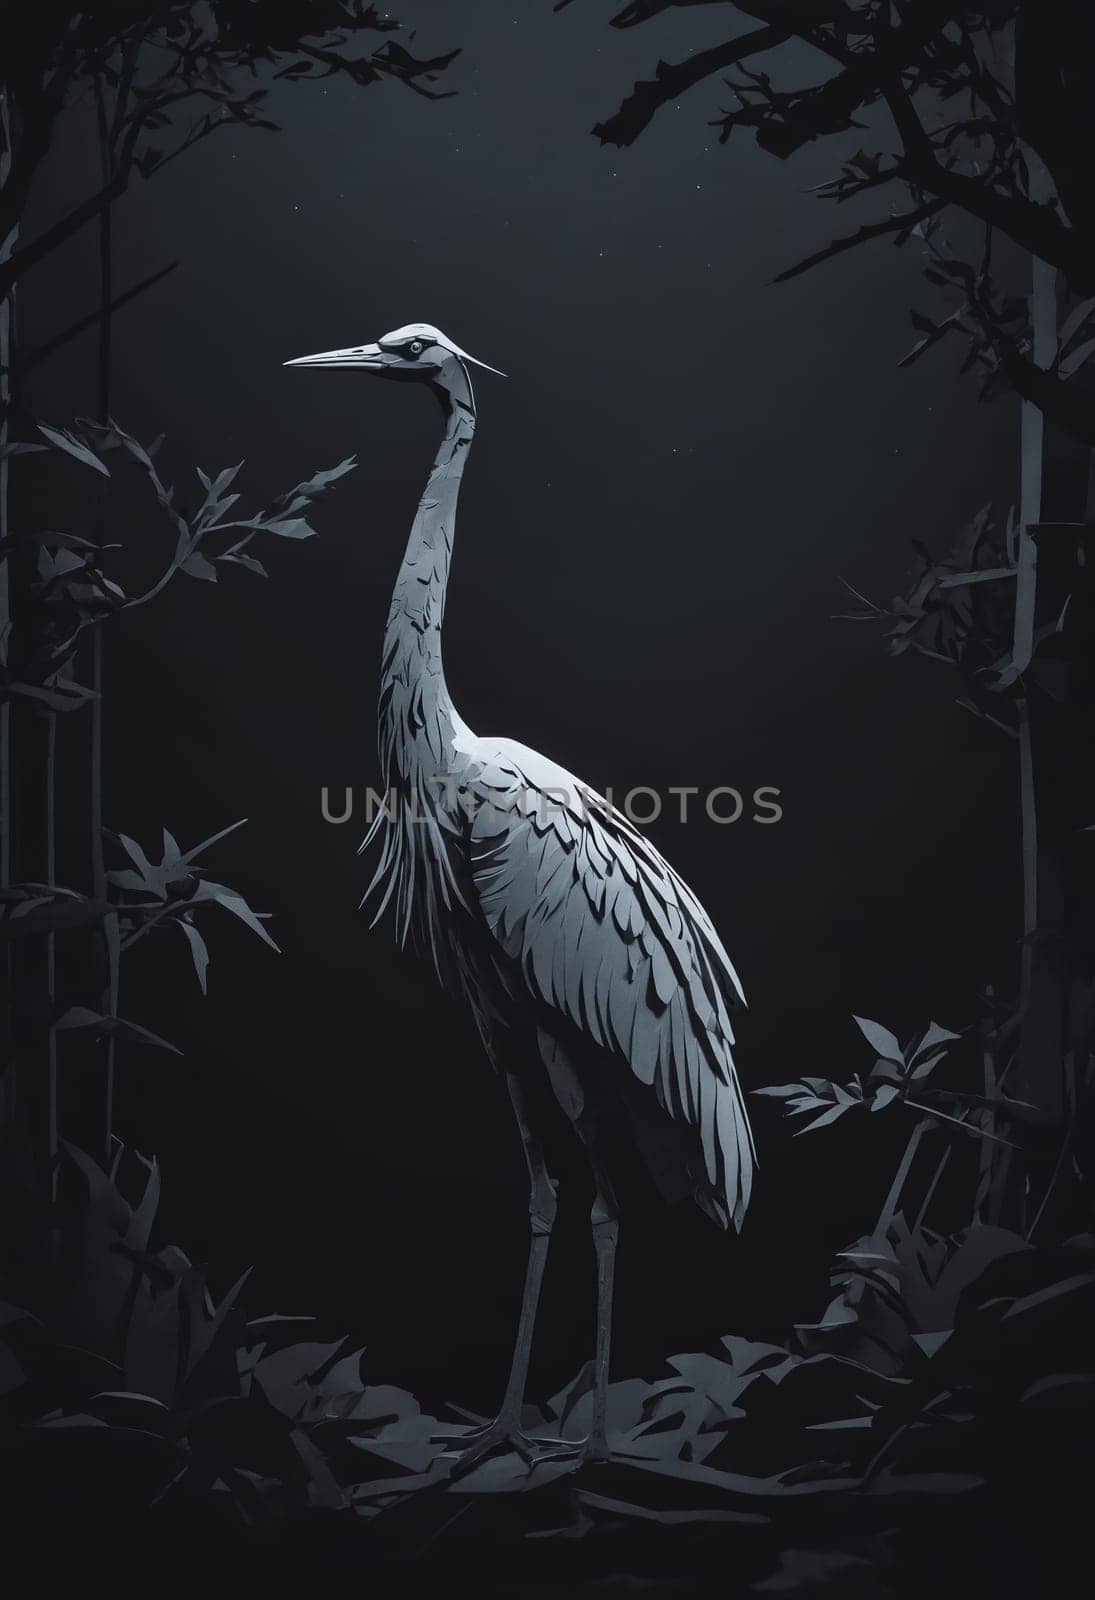 The image captures the understated elegance of a crane, a symbol of grace and longevity in nature.